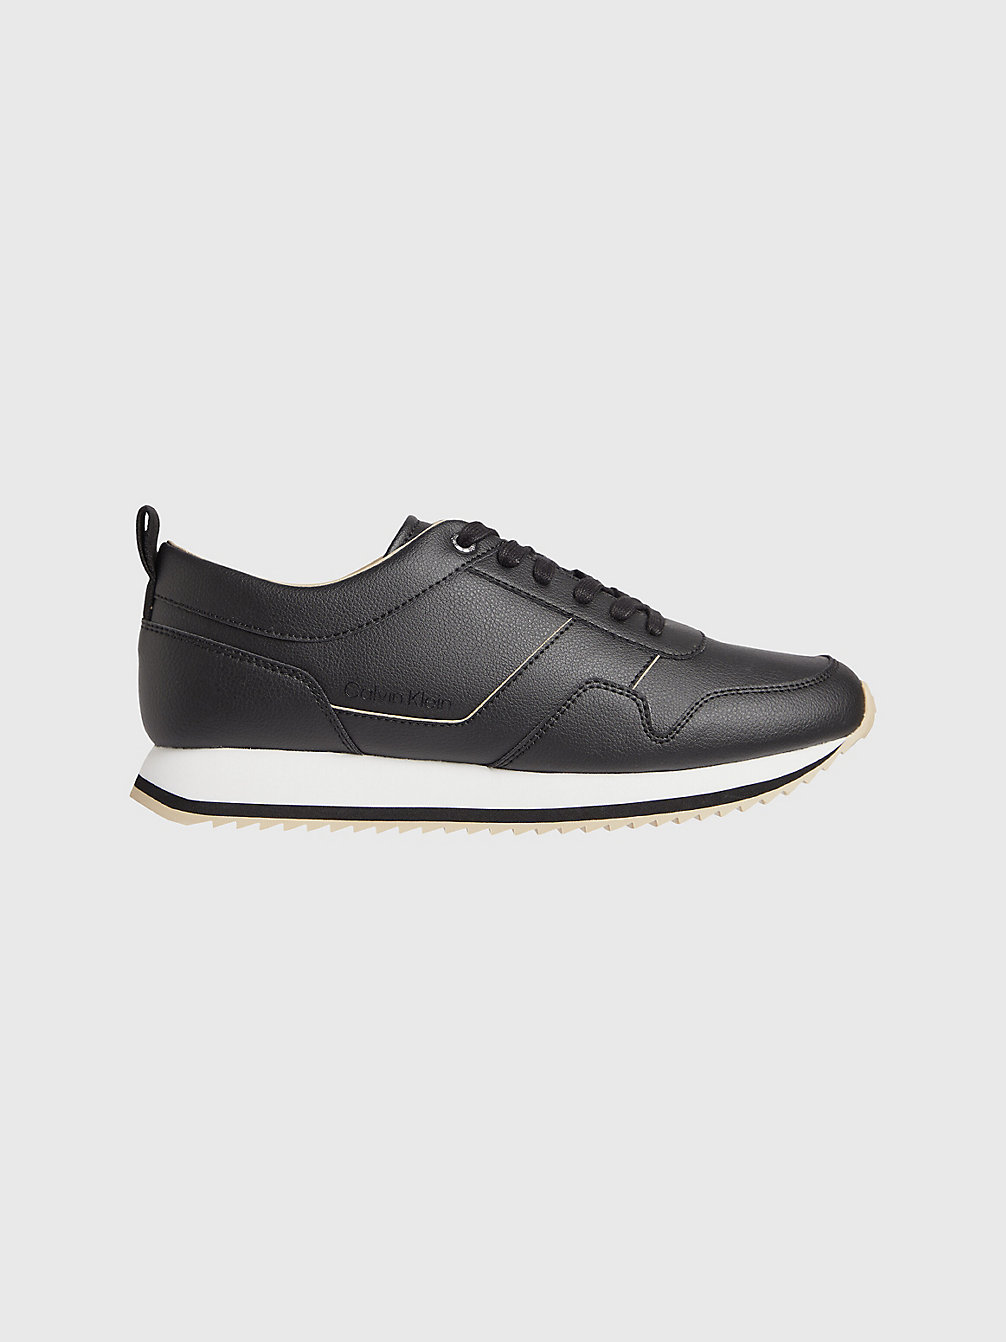 PVH BLACK Recycled Vegan Leather Trainers undefined men Calvin Klein